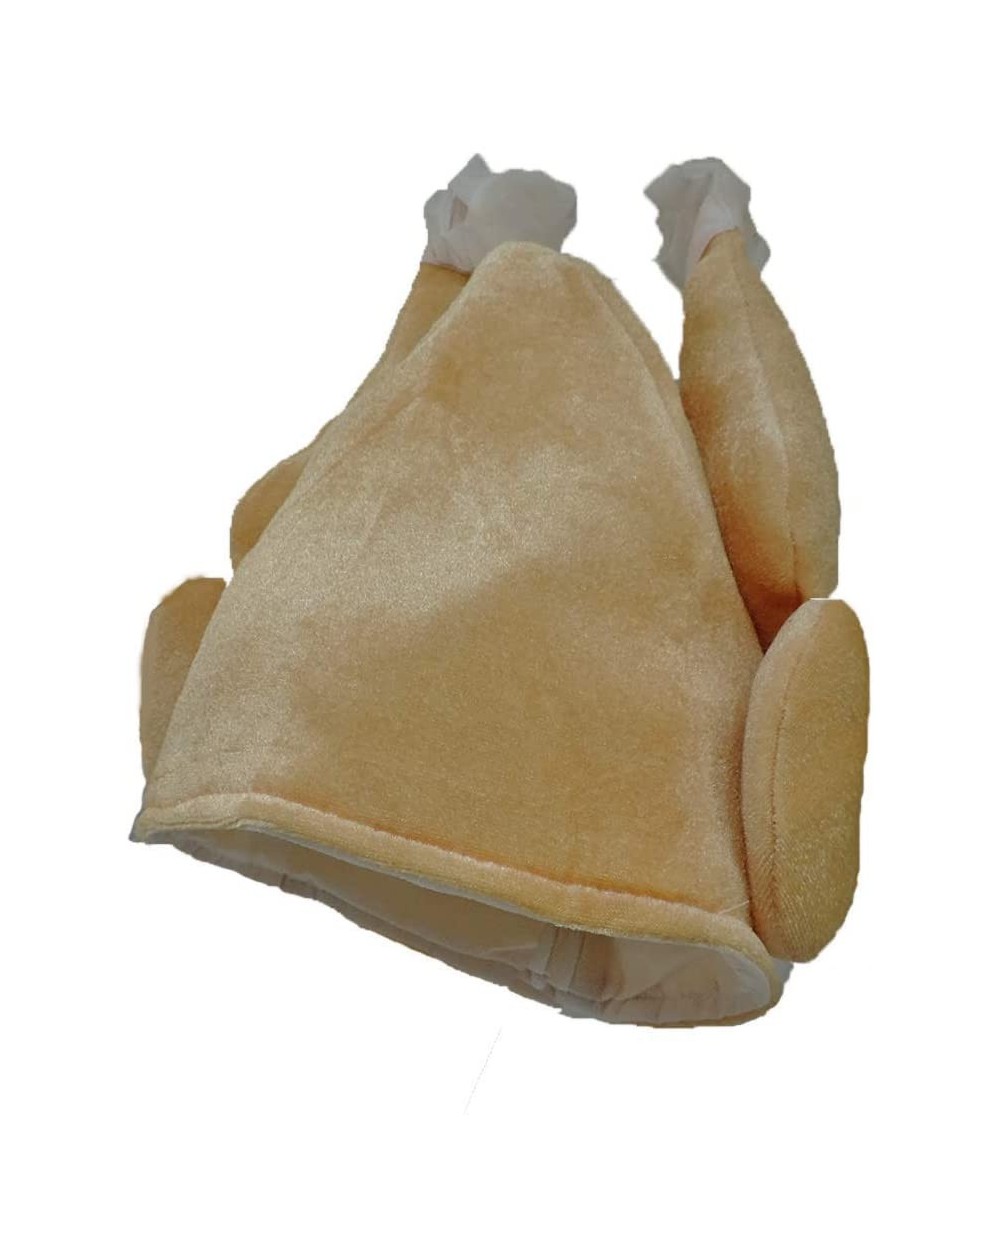 Party Hats Plush Roasted Turkey Novelty Thanksgiving Hat - Brown - CE11P281THF $9.98